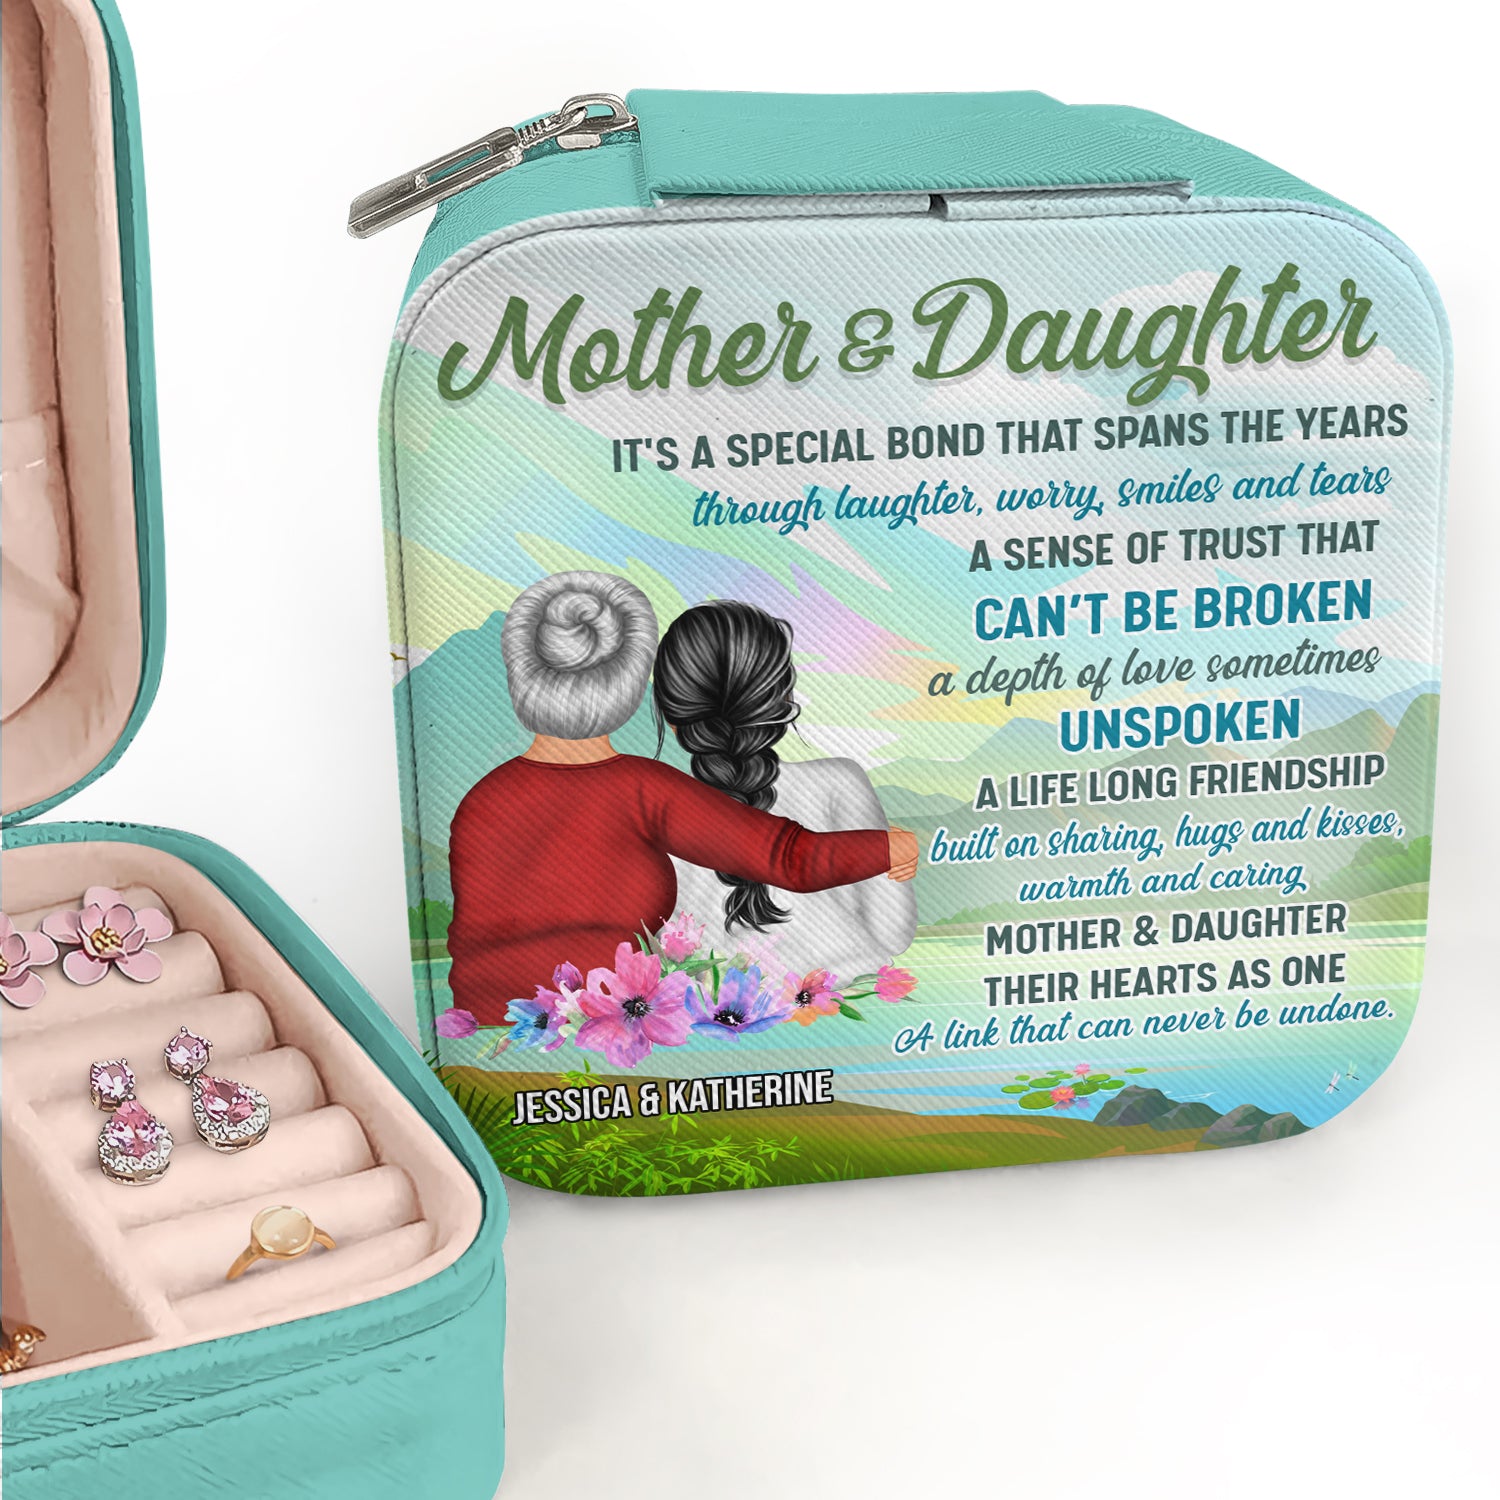 Mother & Daughter It's A Special Bond That Spans The Years - Gift For Mother - Personalized Custom Jewelry Box